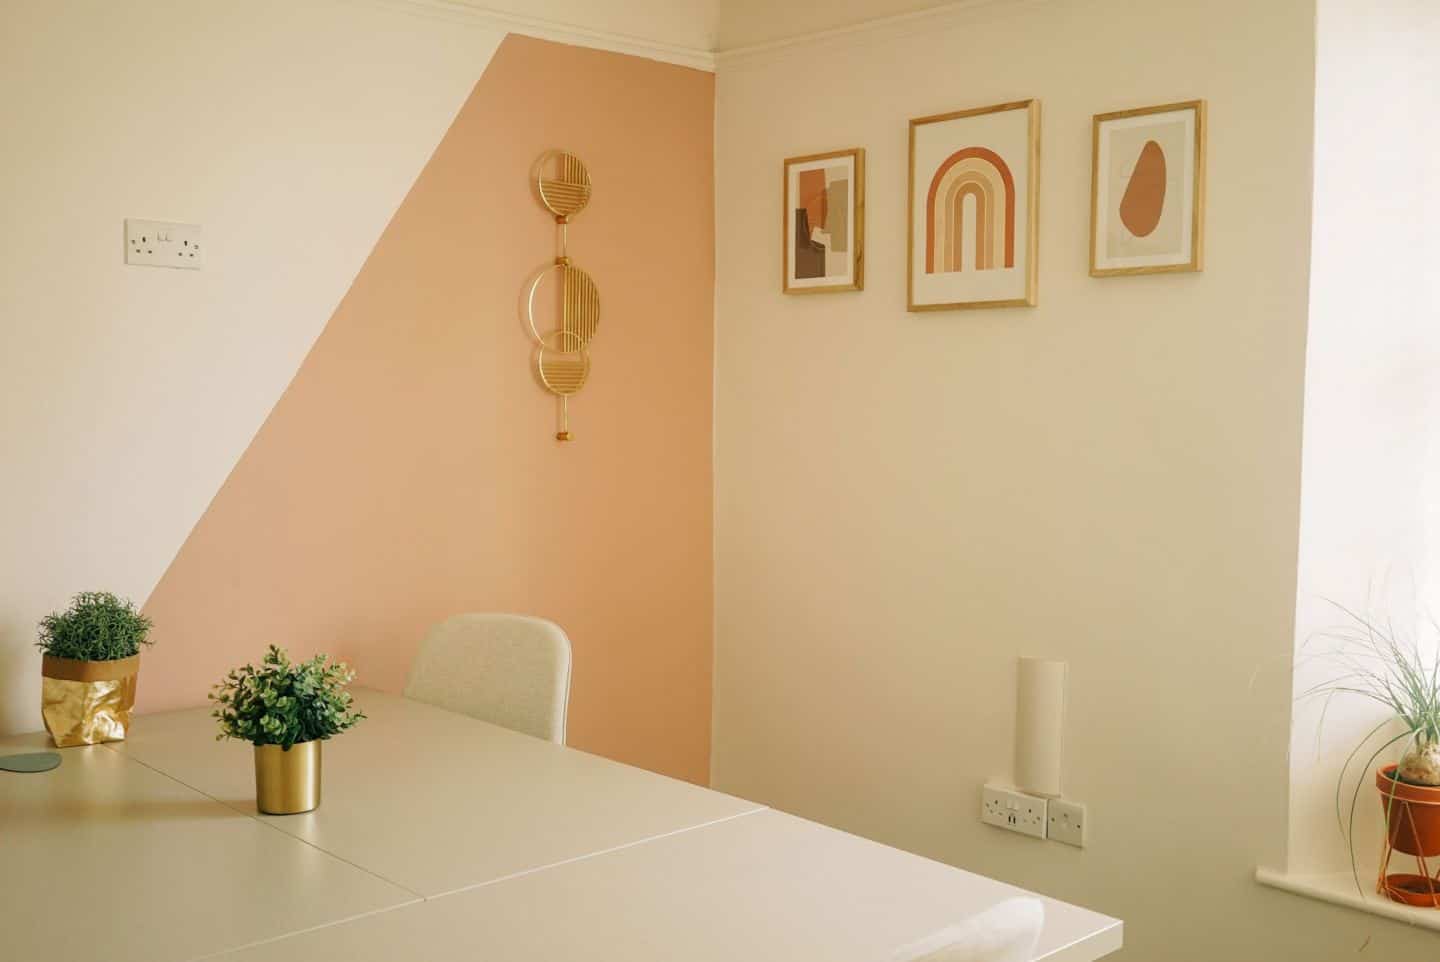 An office at The Tribe, a coworking space for female entrepreneurs in Totnes, Devon